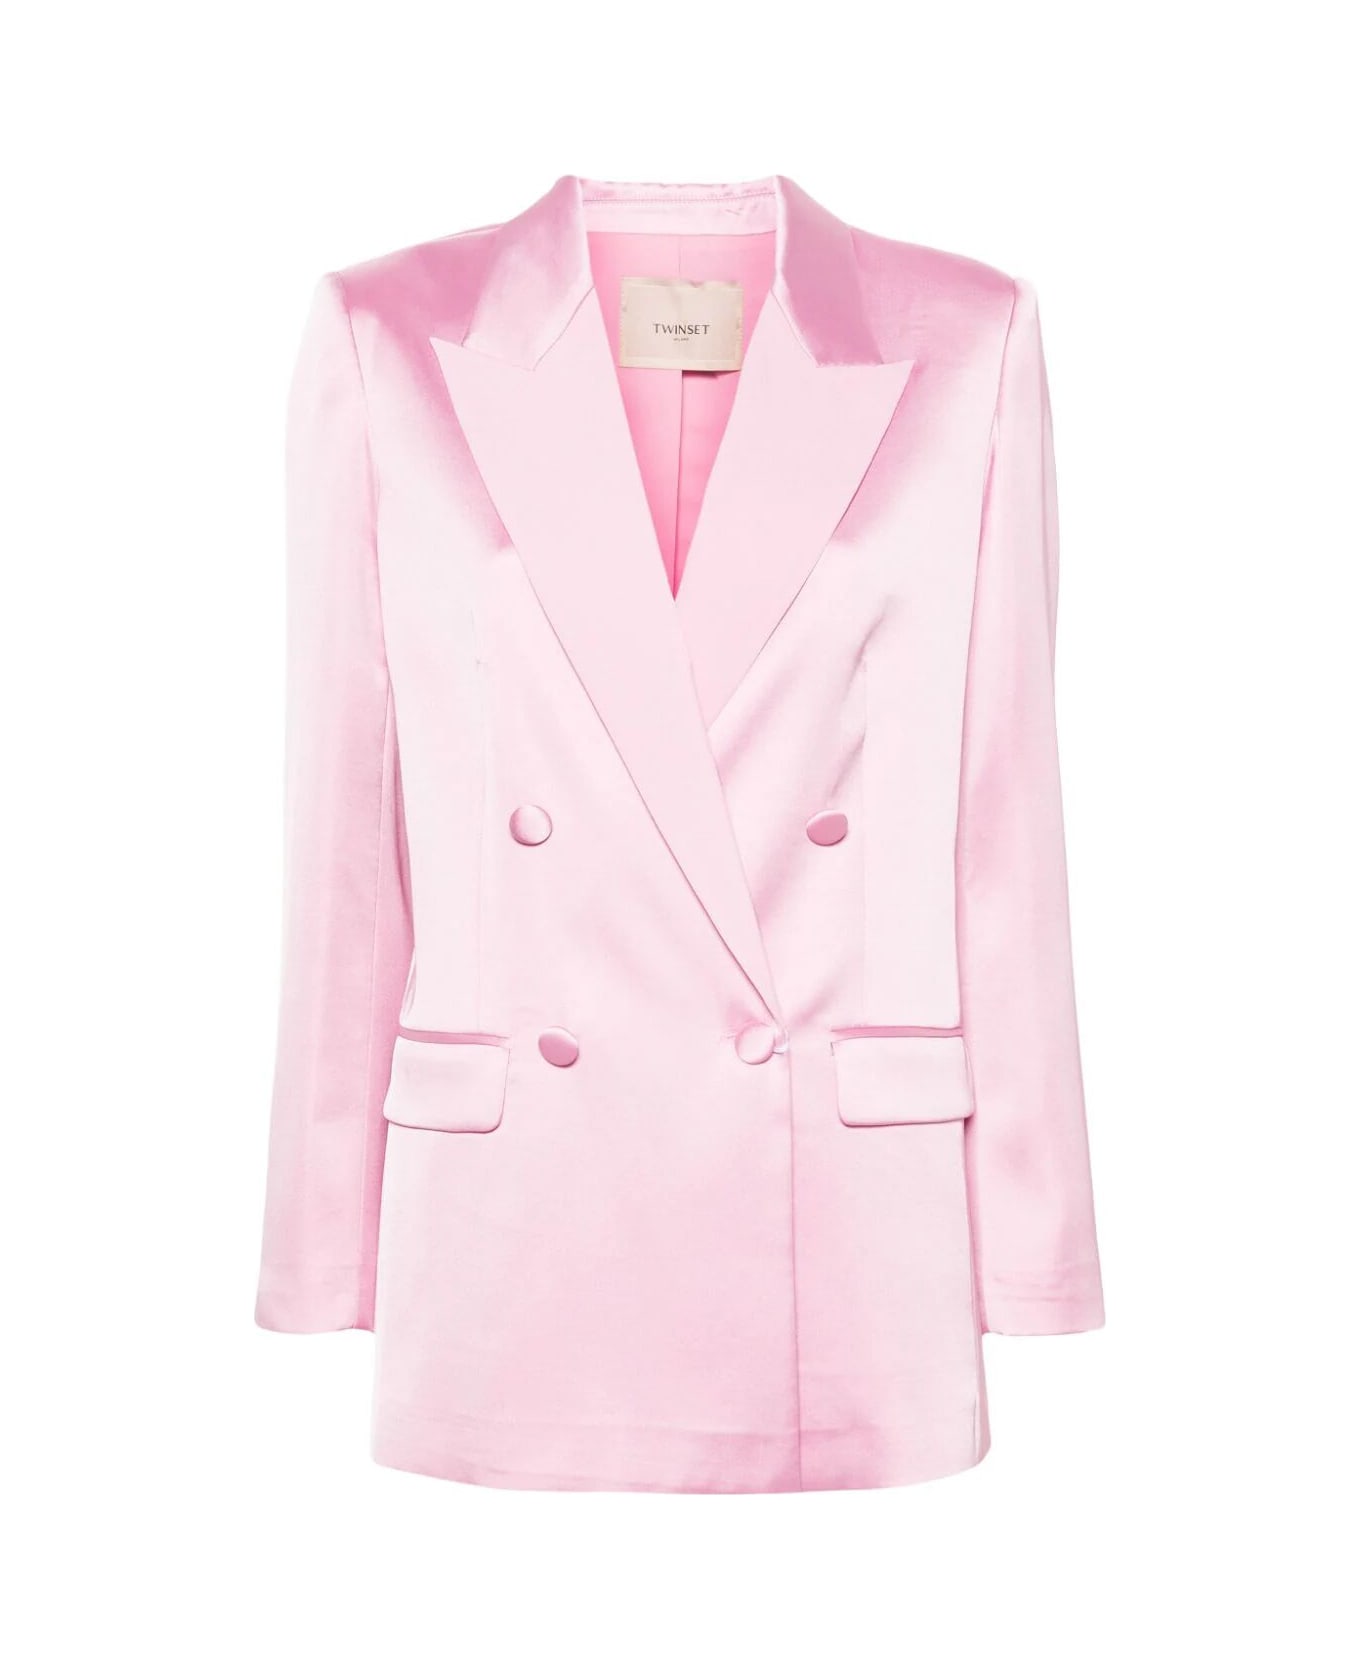 TwinSet Satin Double Breasted Jacket - Bright Pink